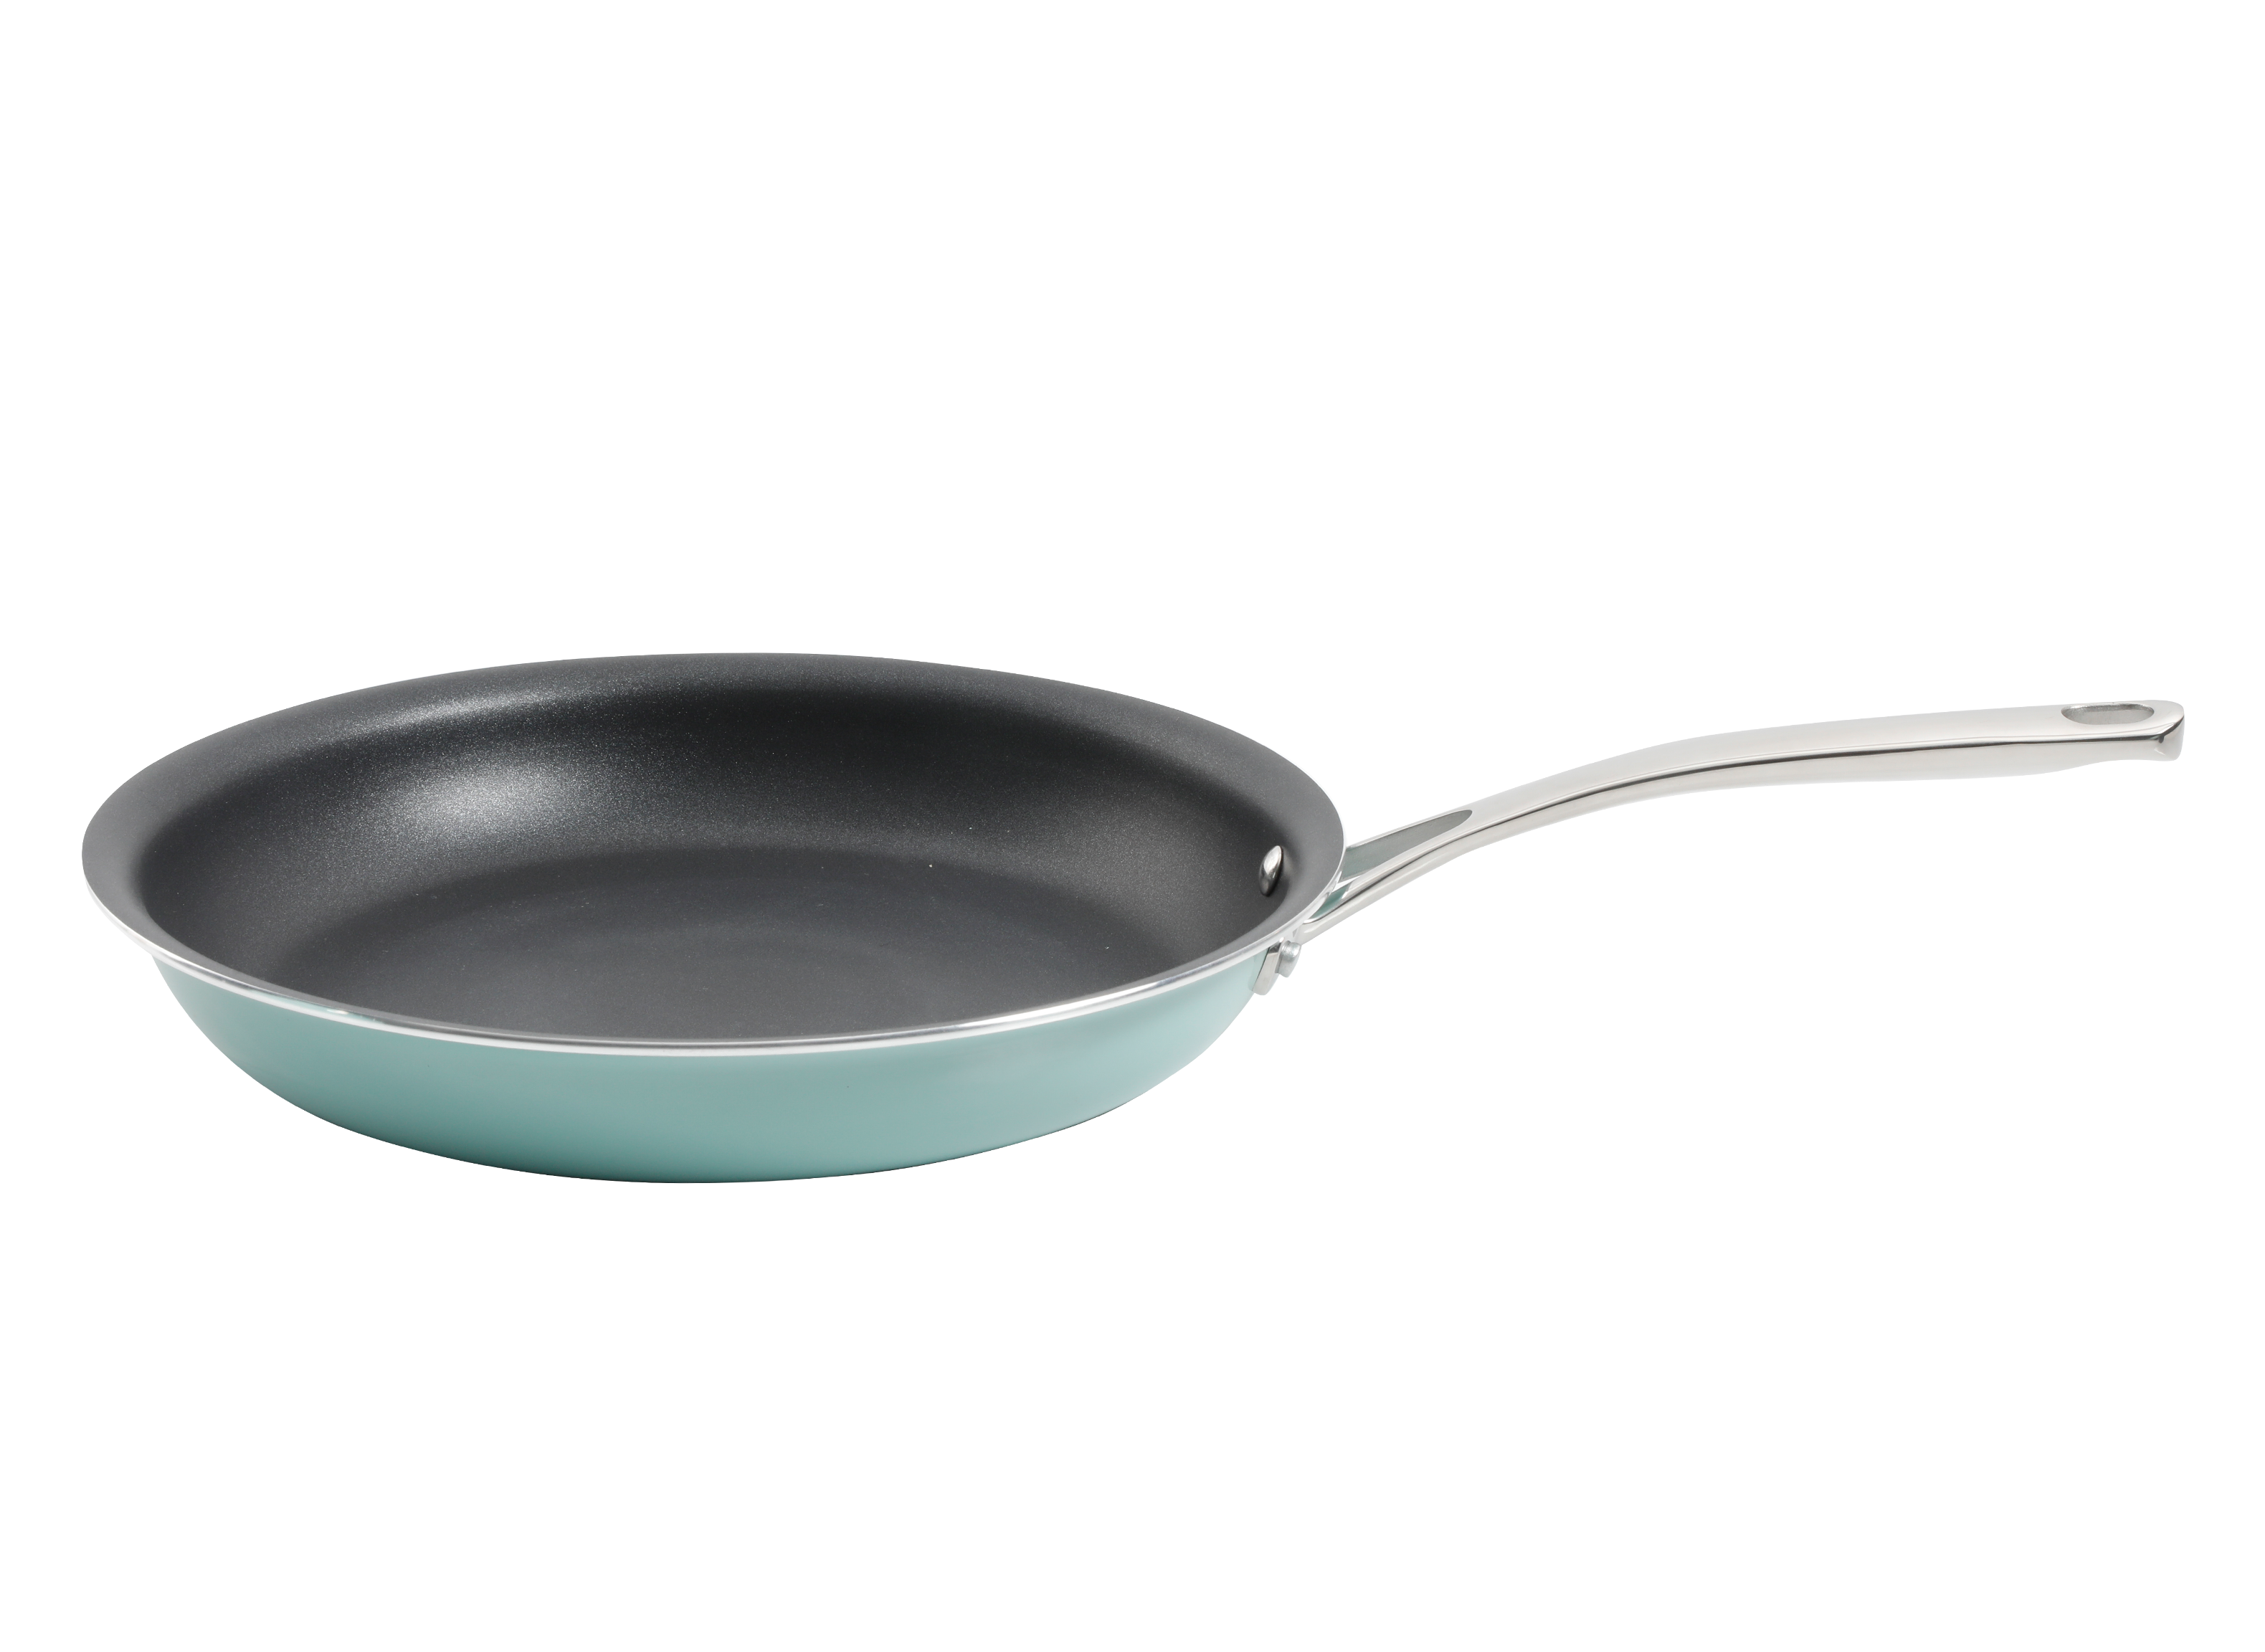 https://crdms.images.consumerreports.org/prod/products/cr/models/402100-frying-pans-nonstick-martha-stewart-collection-hard-enameled-10015707.png